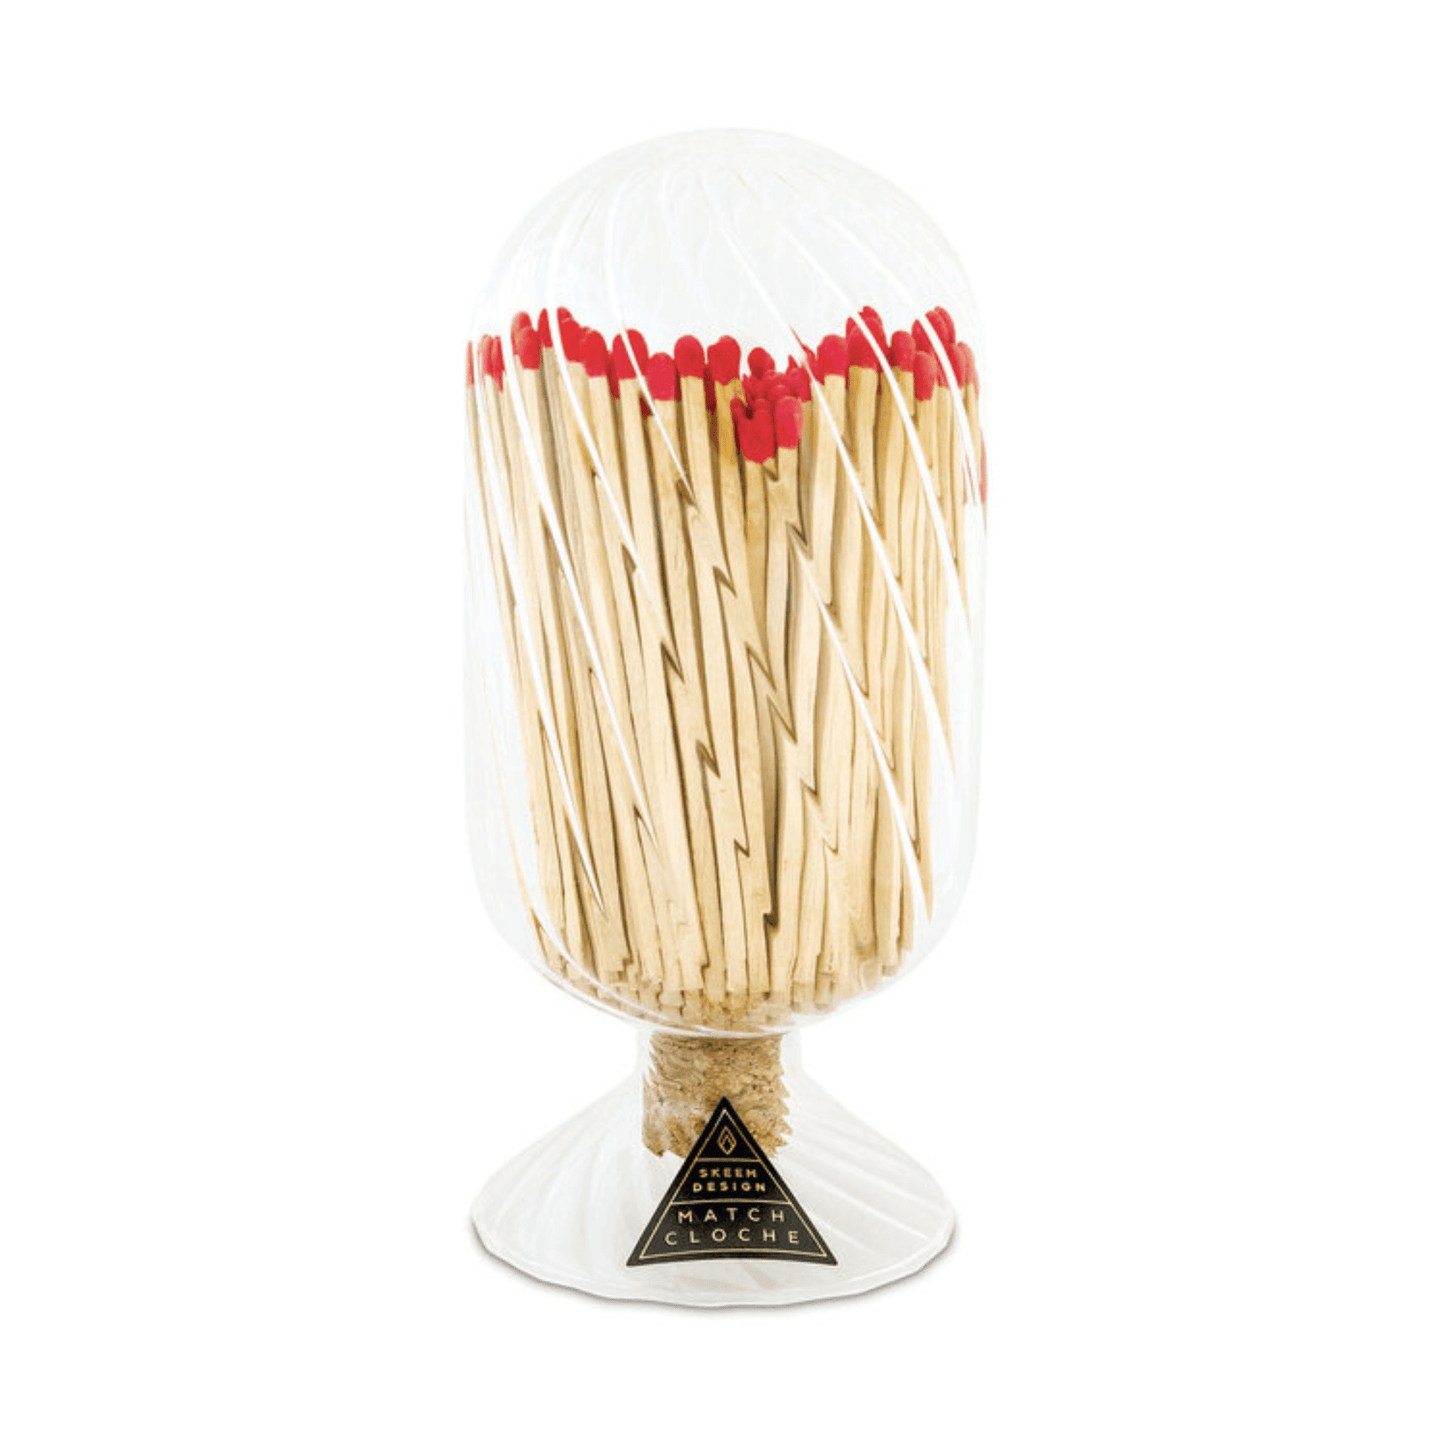 Primary Image of Helix Cloche Red Matches